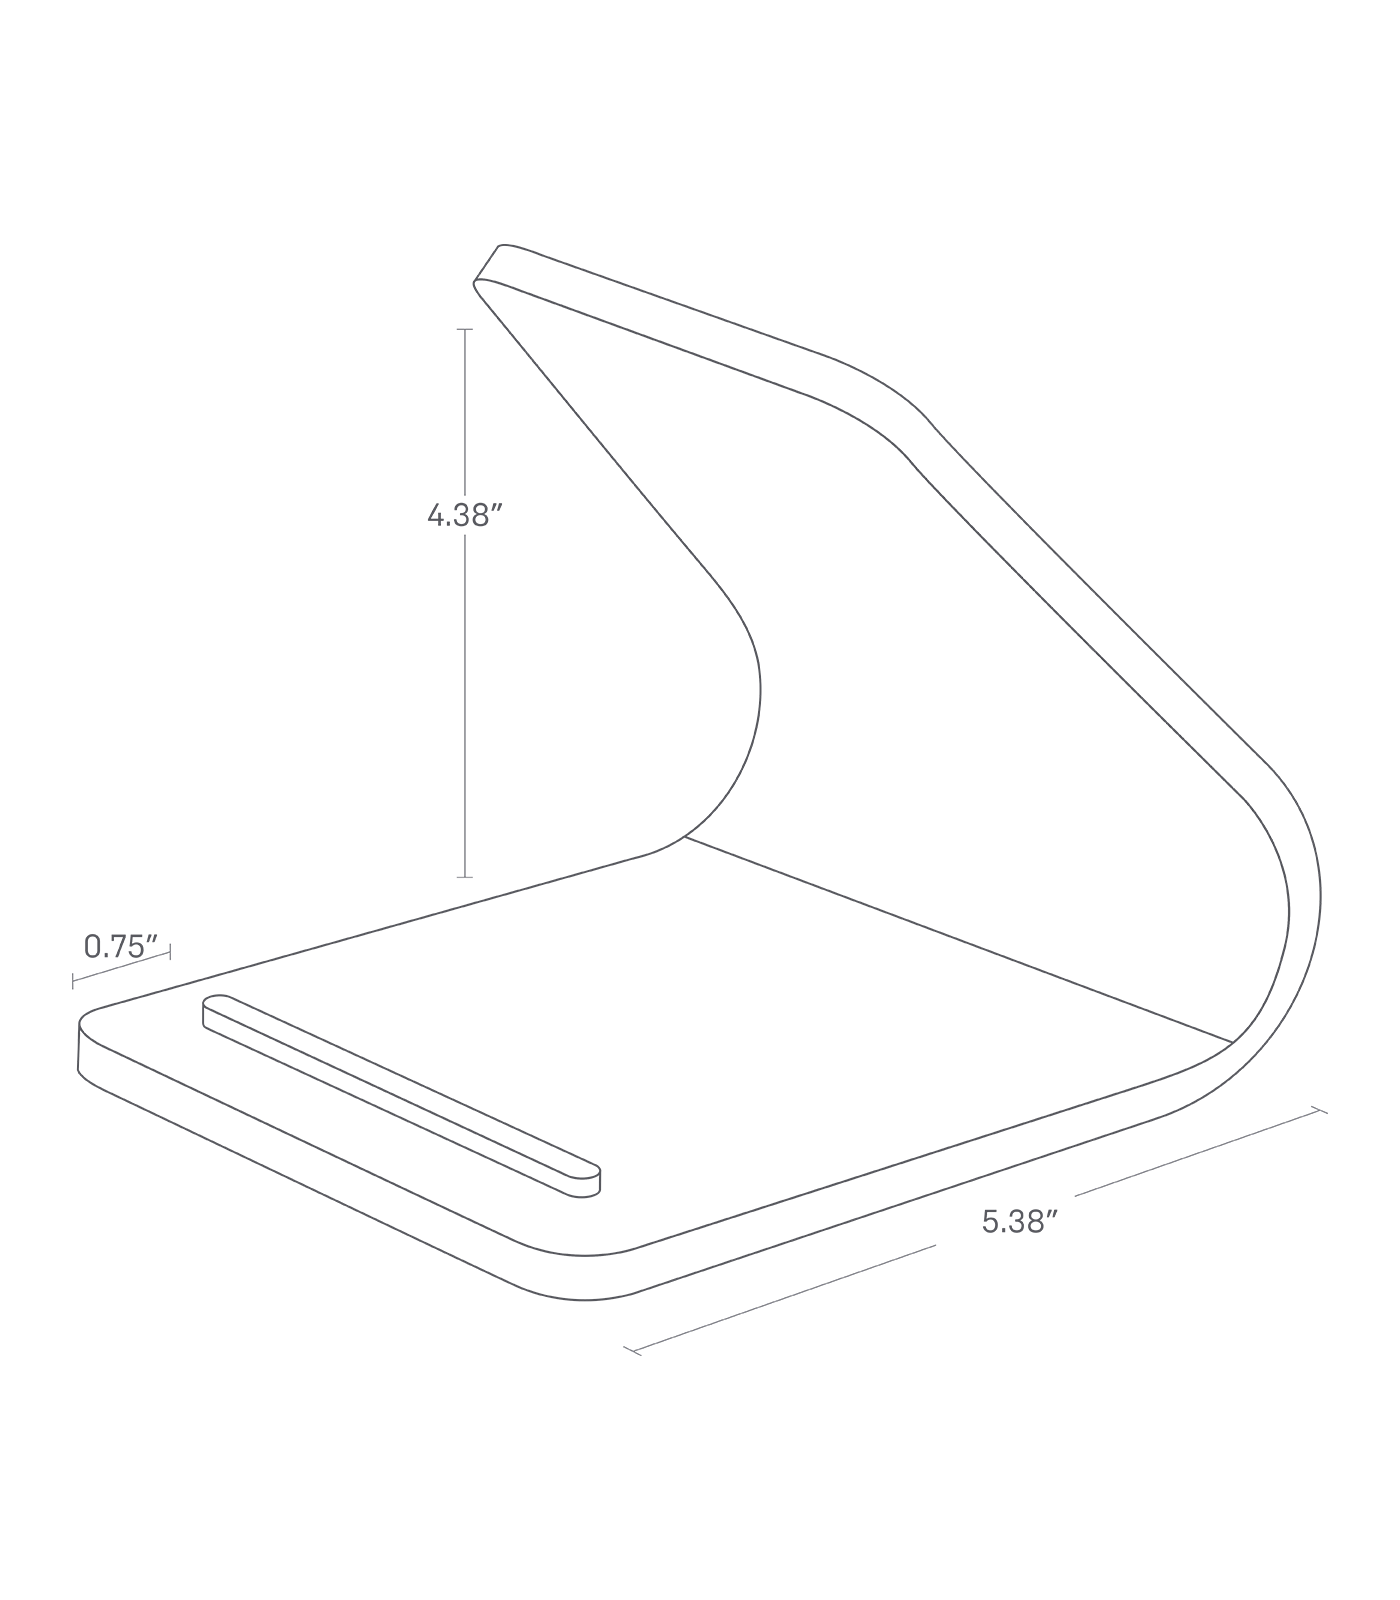 Dimension image for Tablet Stand showing a total height of 4.38